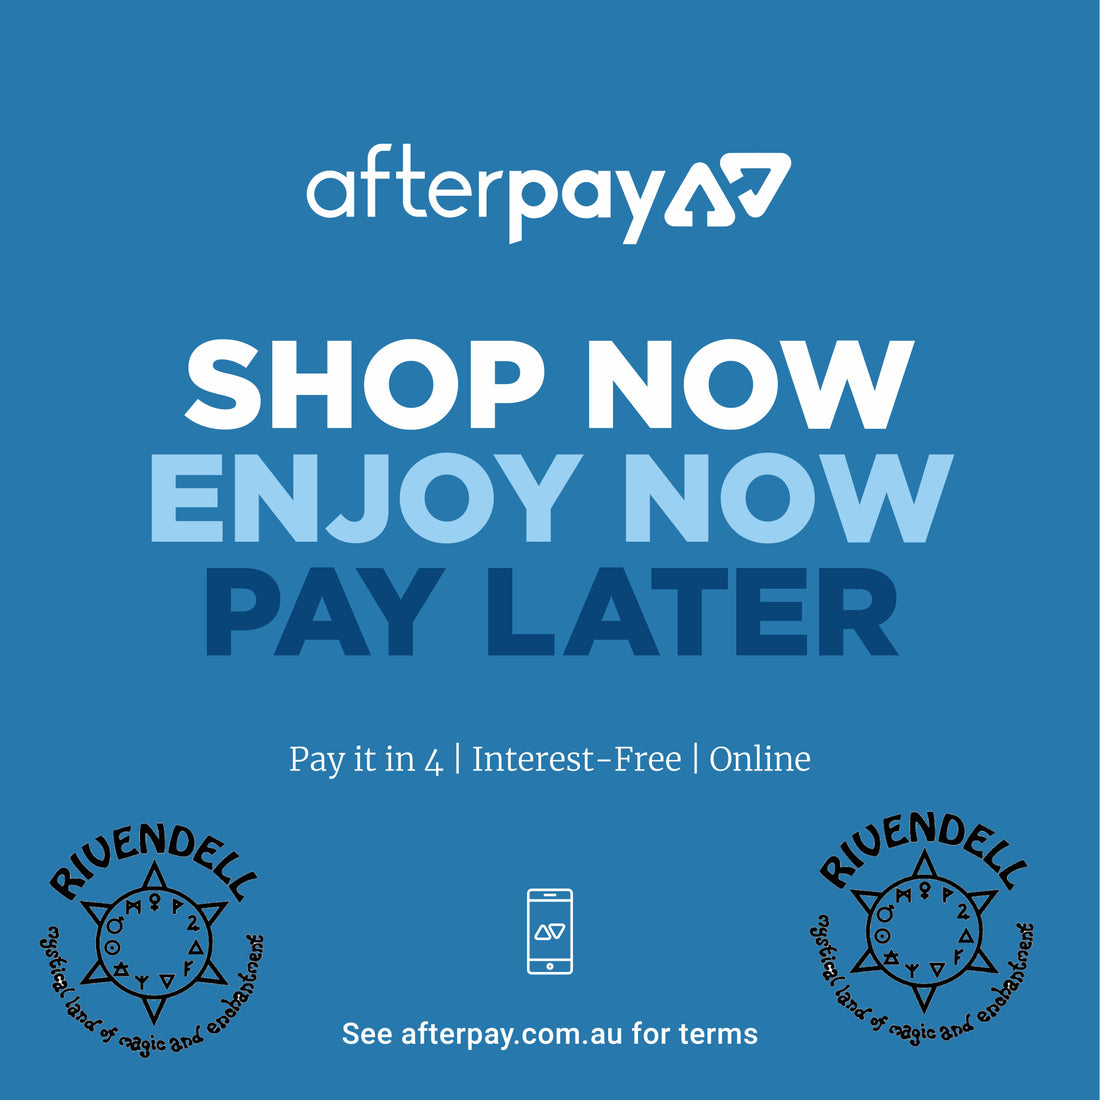 Huge new range online, and we're now accepting AfterPay! – Rivendell Shop